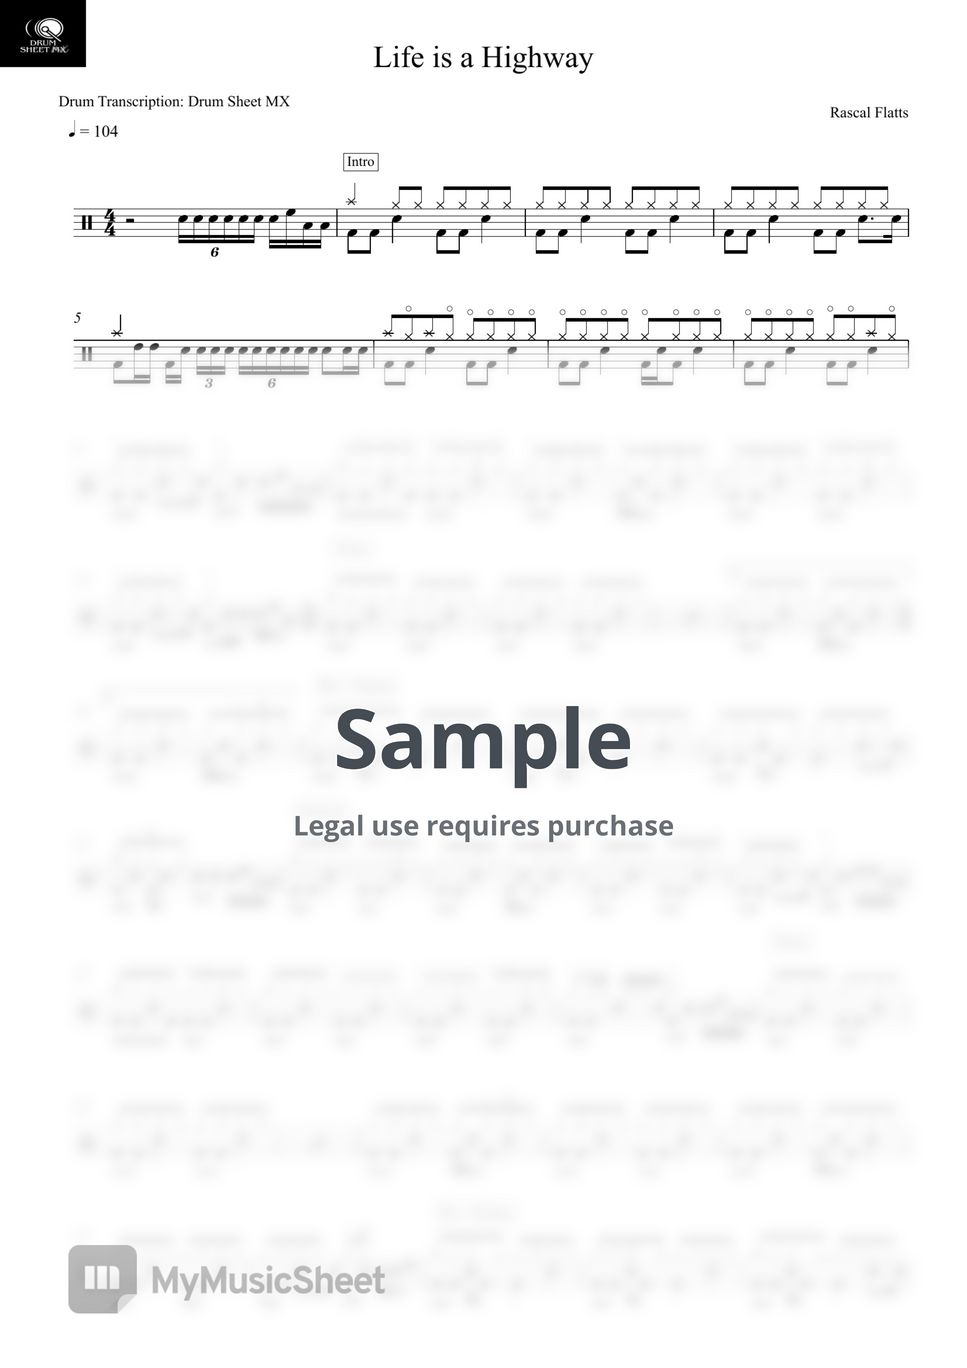 Life is a Highway by Drum Transcription: Drum Sheet MX